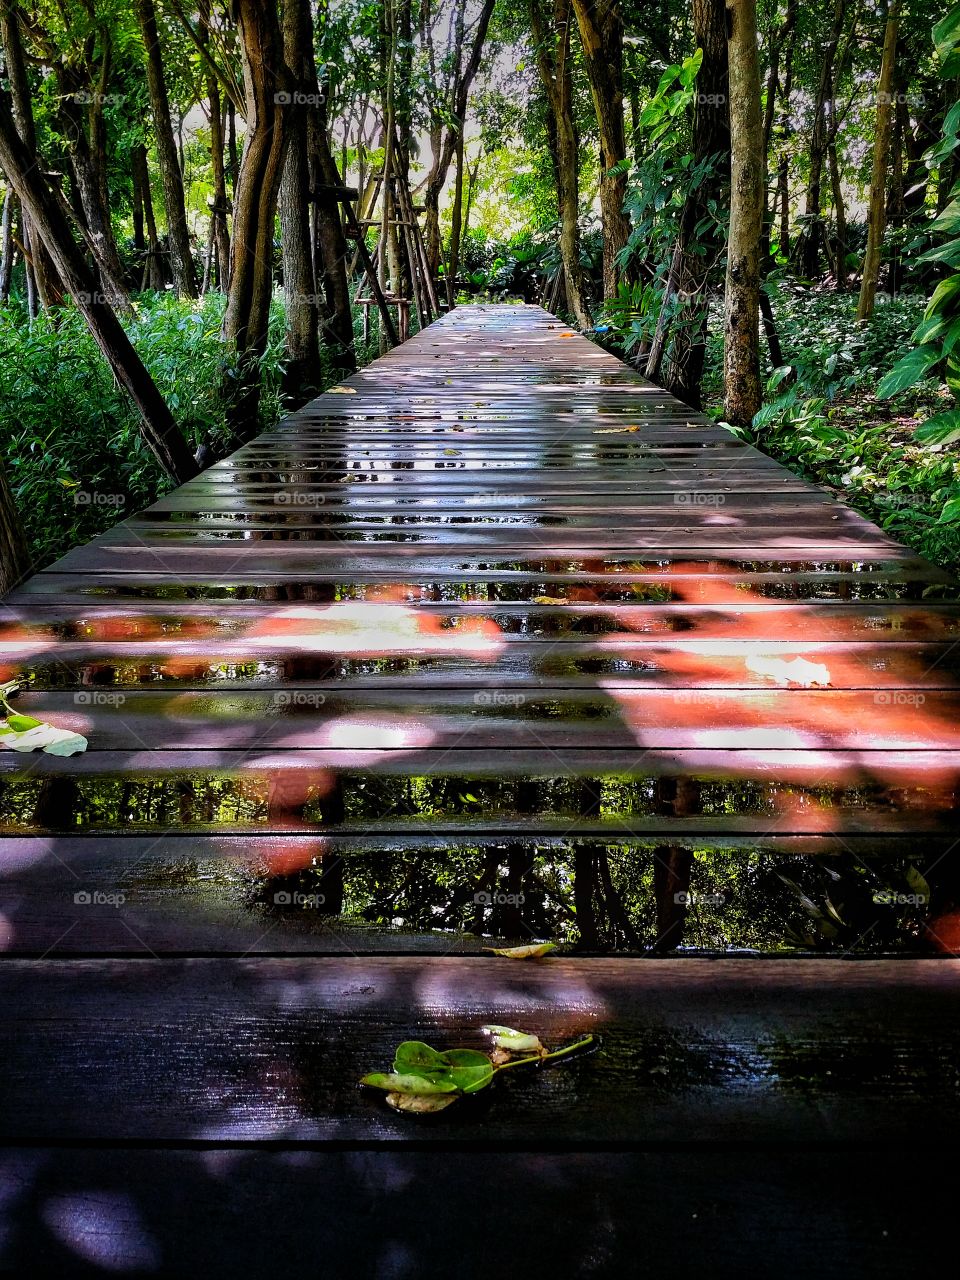 The wooden bridge pathway that stretches among the trees on a rainy day causes waterlogging and sunlight shining, making the atmosphere fresh and shady.